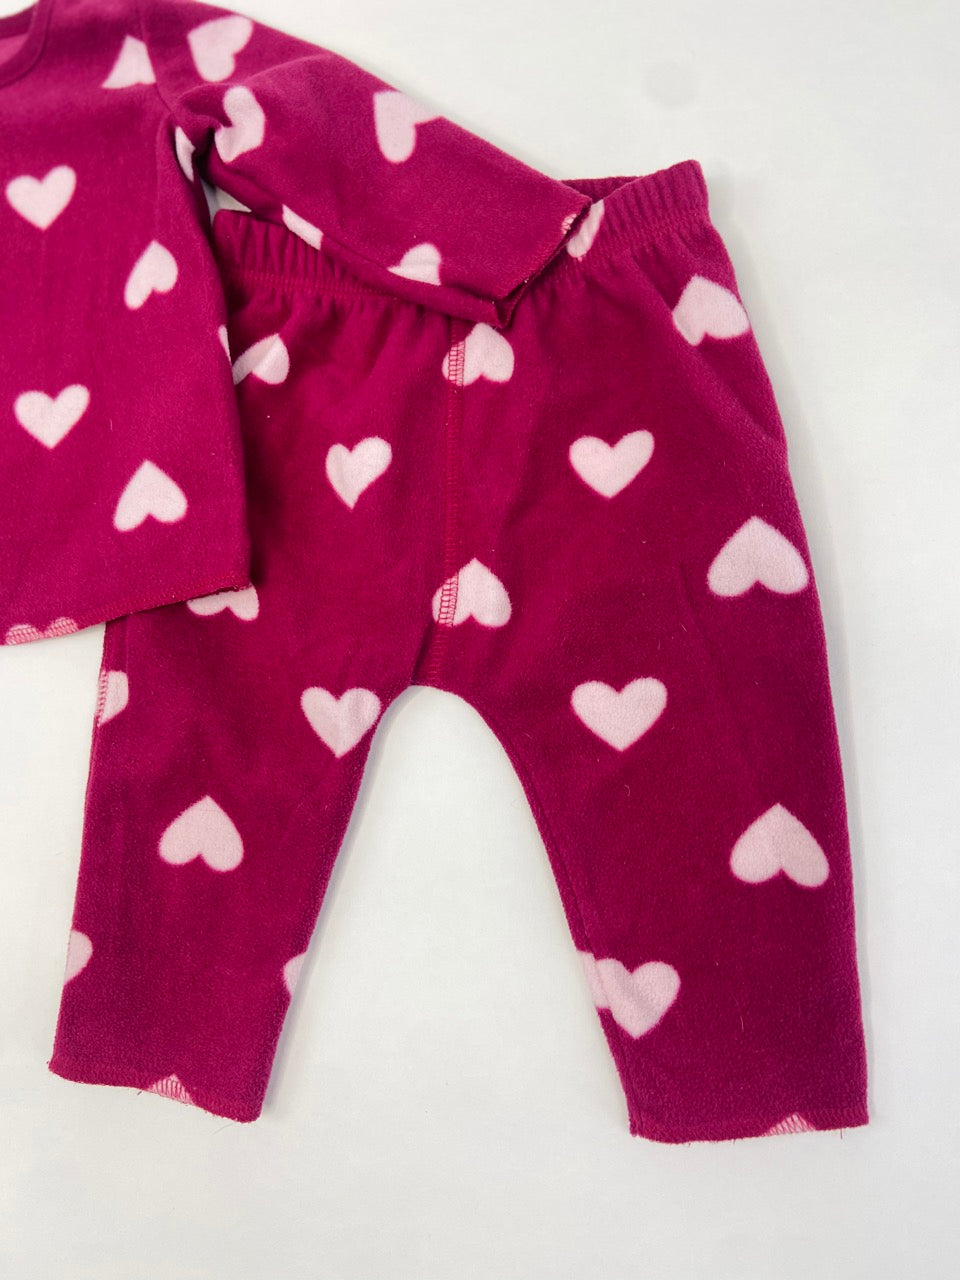 Fleece Hearts Outfit - 6 Months